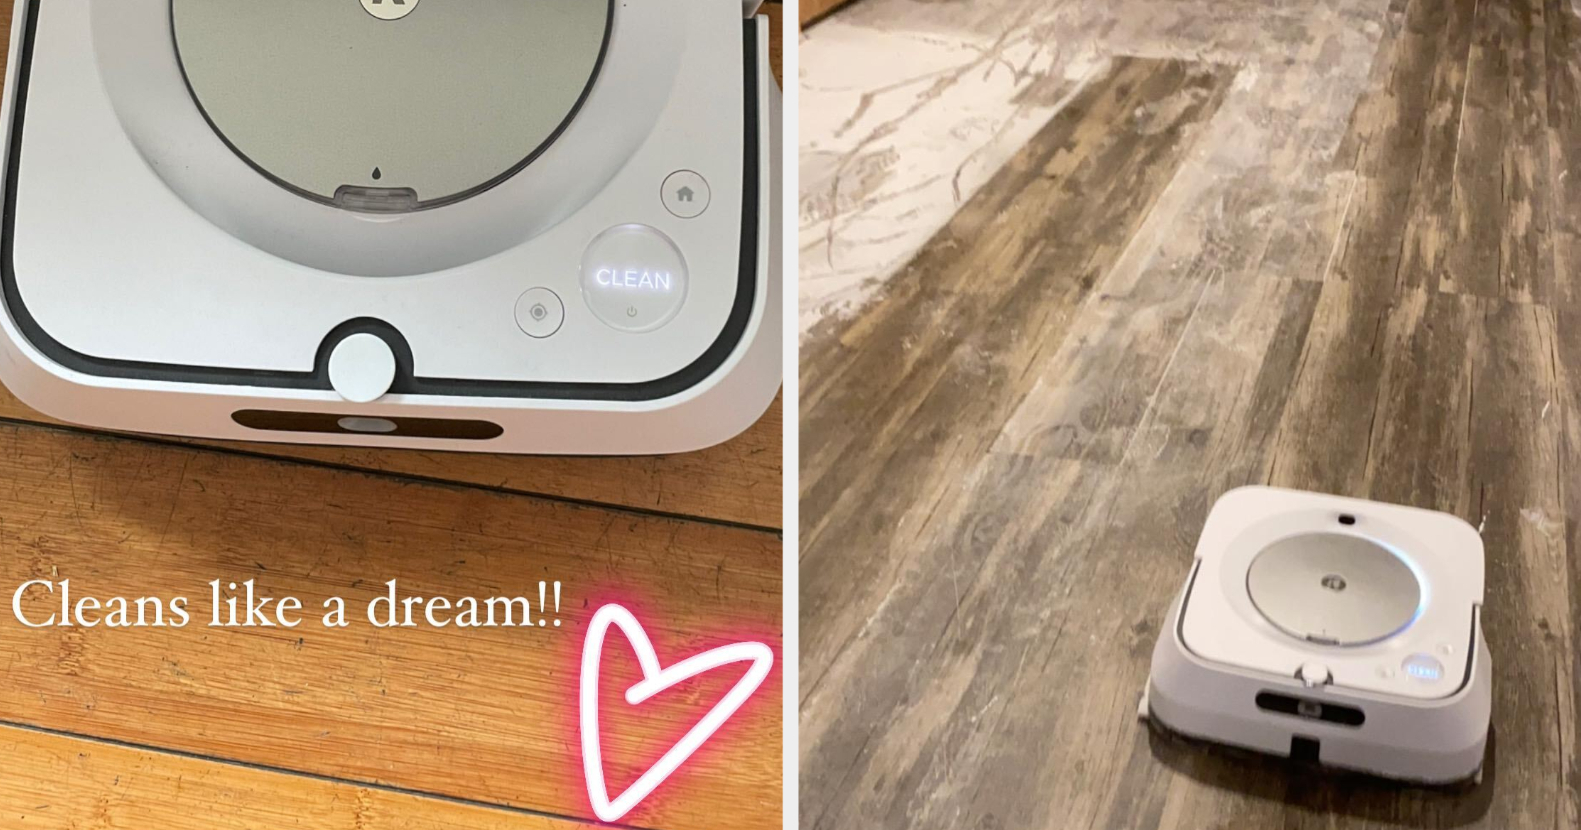 Why is the Braava Jet M6 so bad while everything else iRobot makes is  great? : r/iRobot